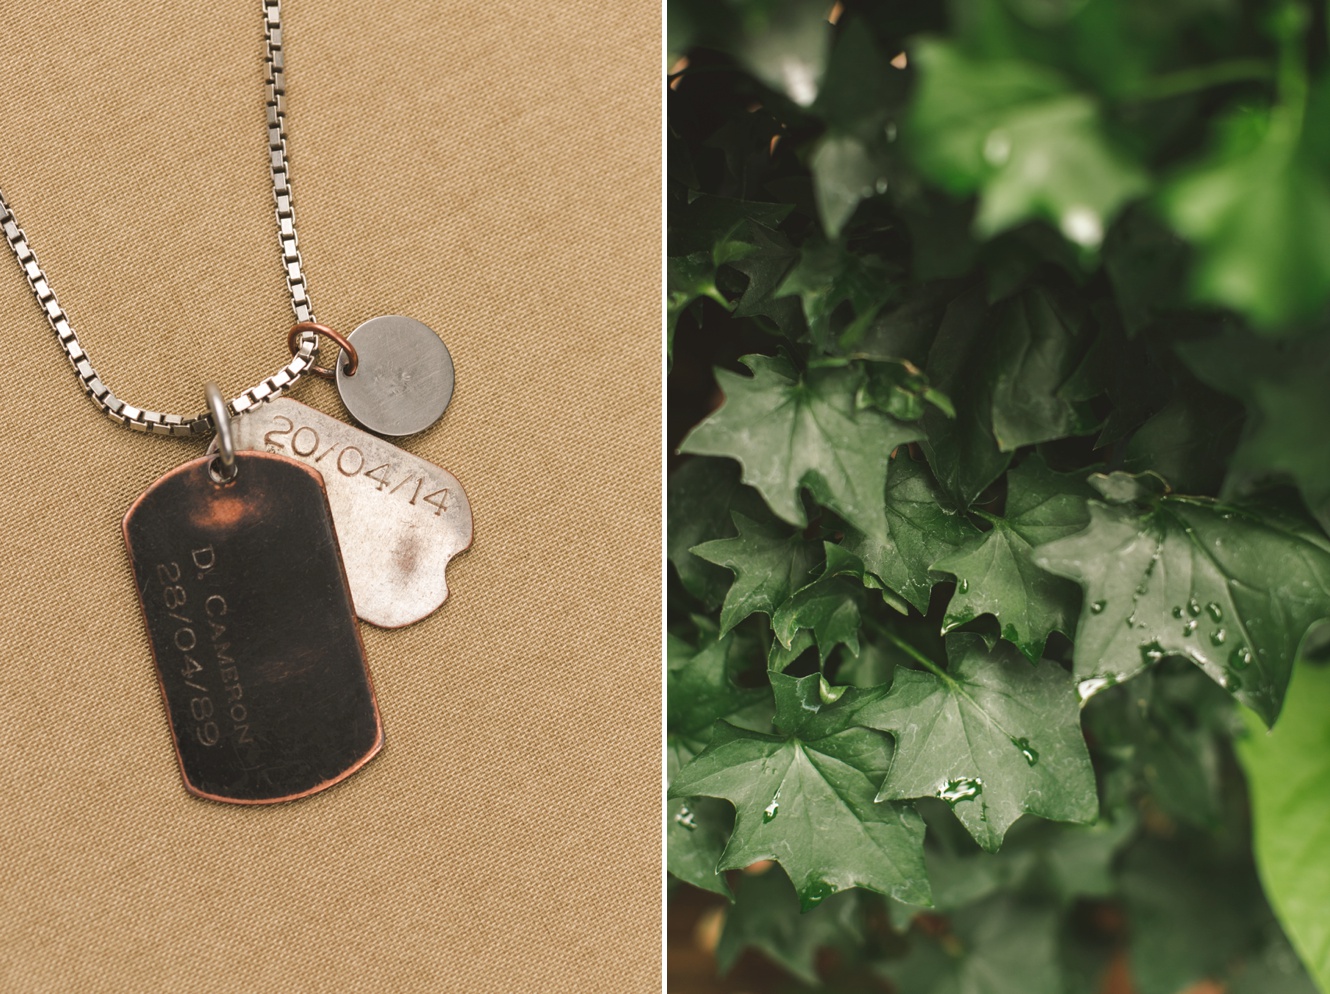 Dog tags worn by the Groom with date they met photo